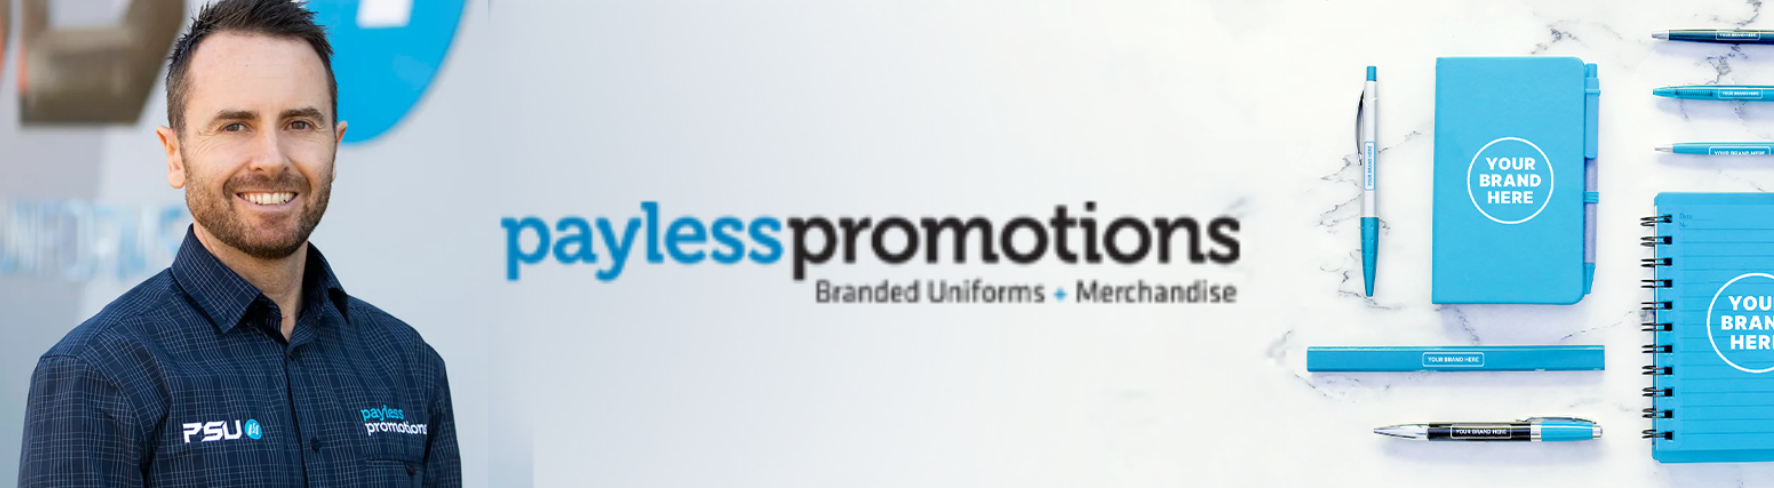 Payless Promotions